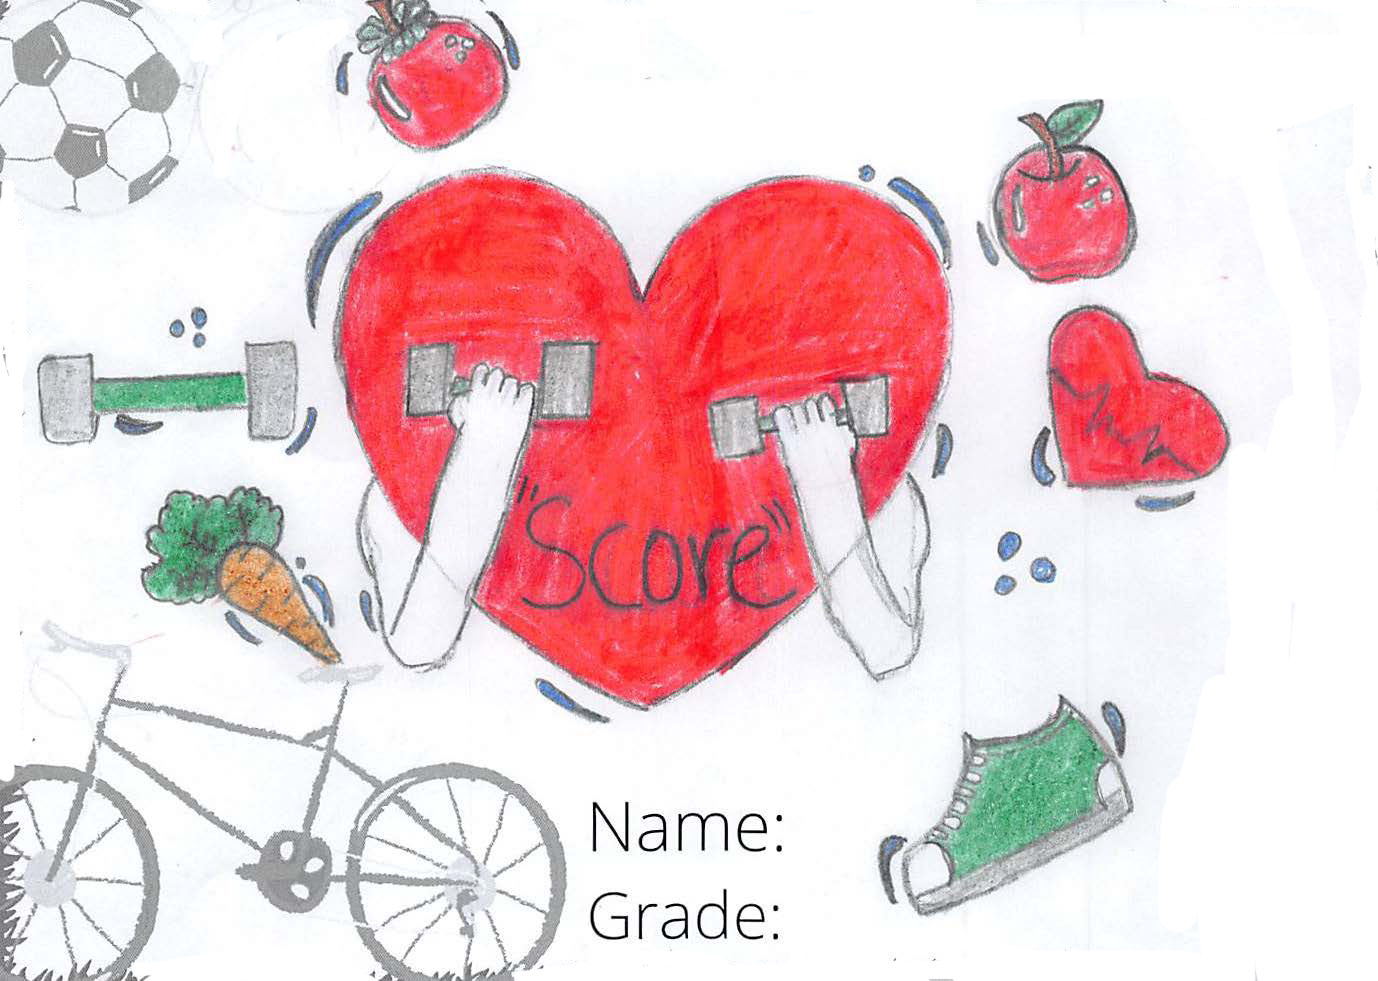 Pencil crayon drawing for the SCORE! logo contest. The drawing includes a heart lifting weights.